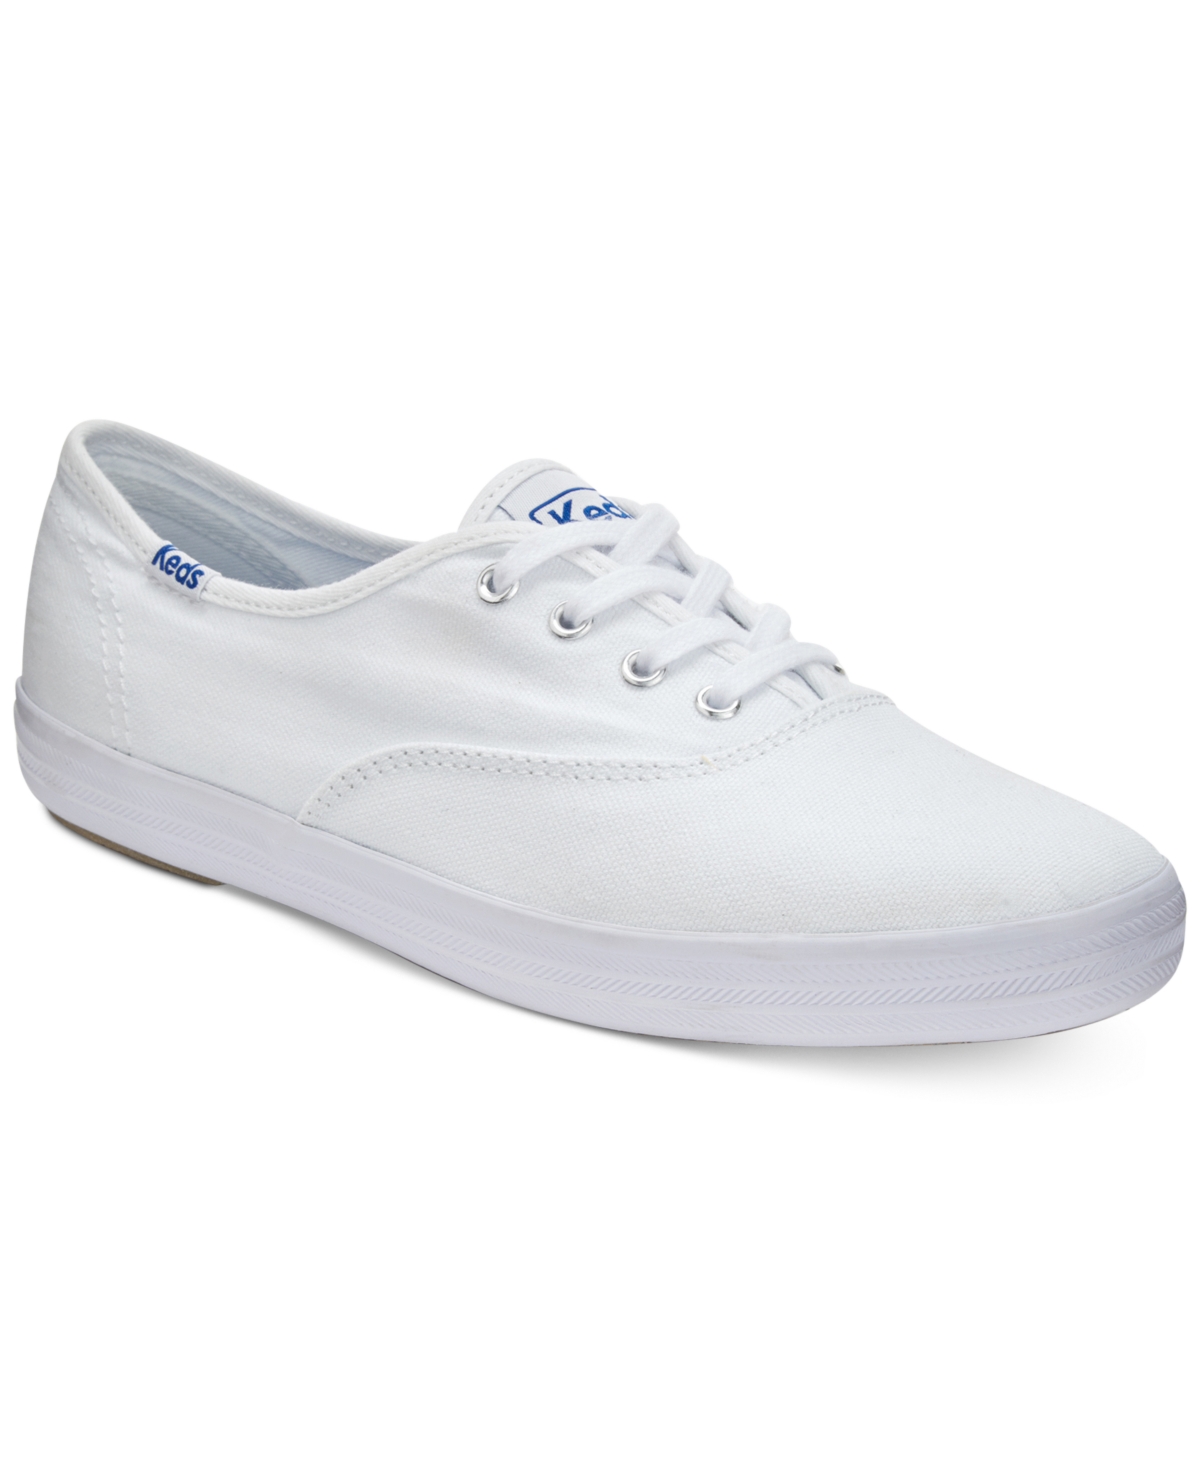 Women's Champion Ortholite Lace-Up Oxford Fashion Sneakers from Finish Line - White